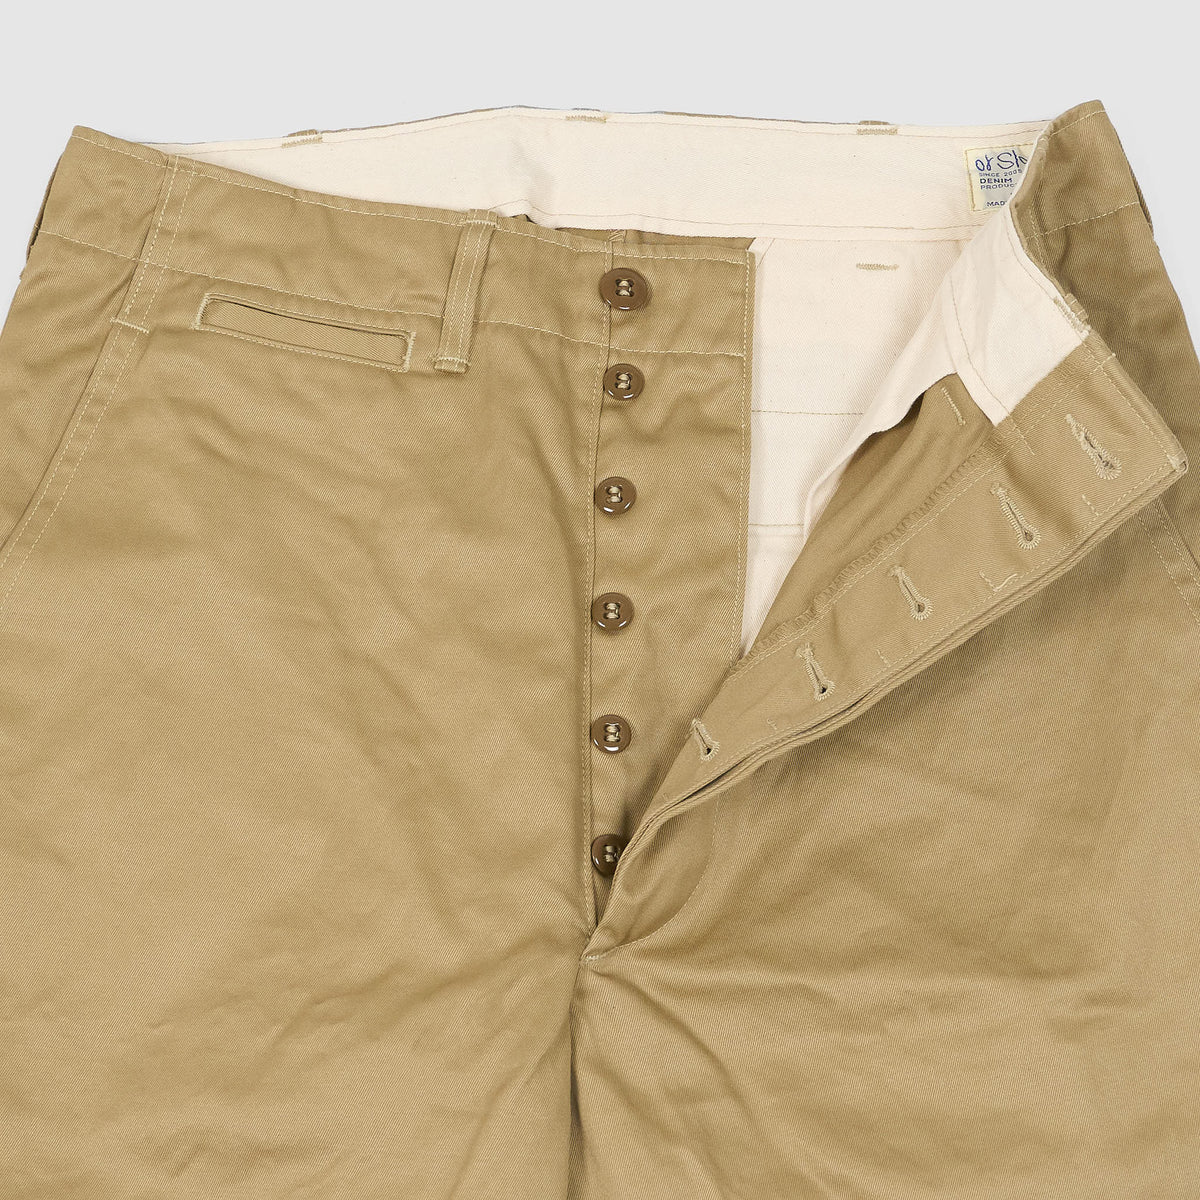 OrSlow Vintage Fit Army Chino Trousers